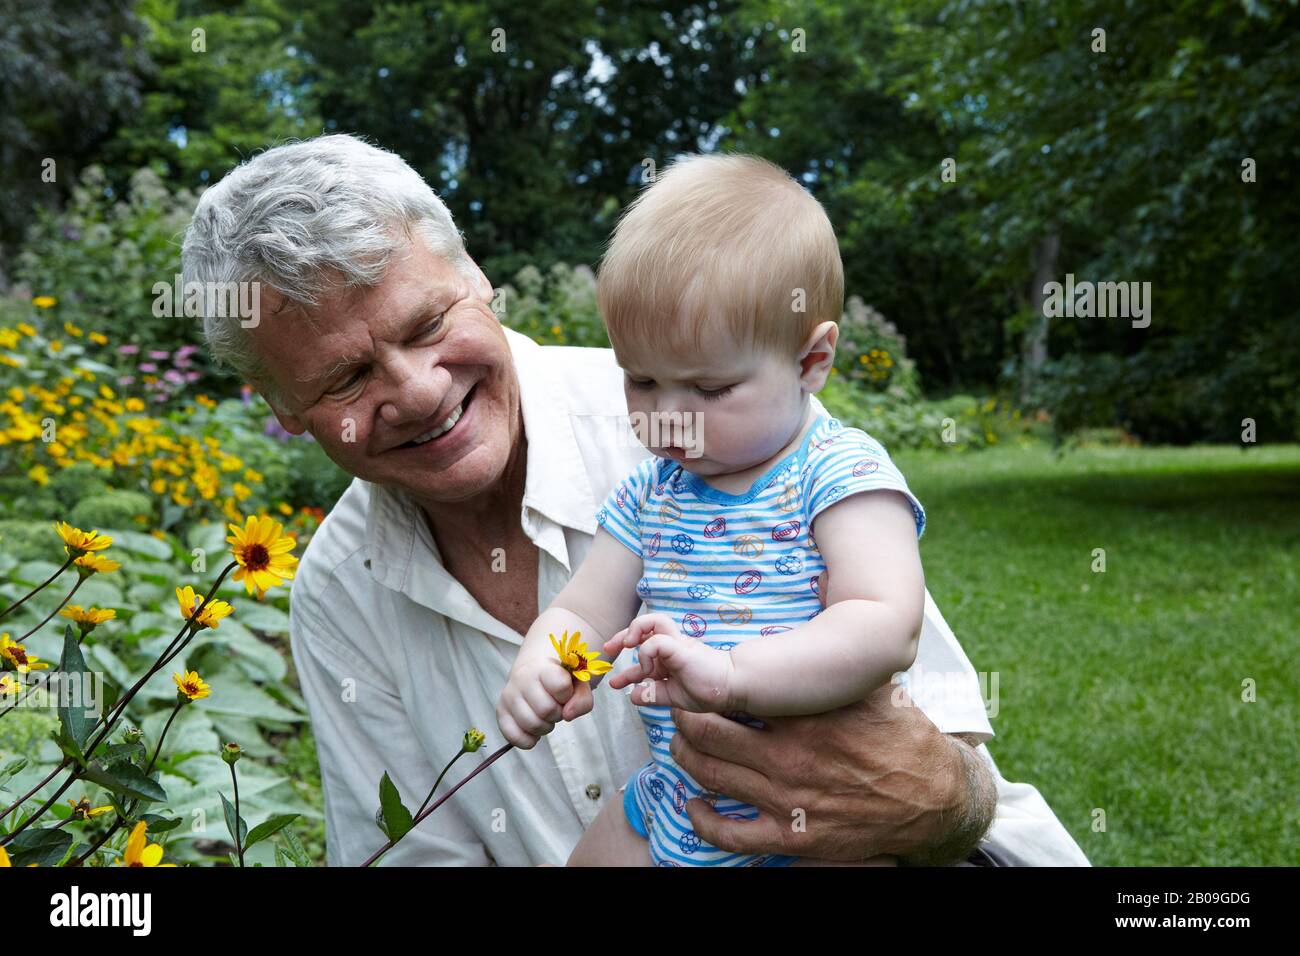 70 year old Grandfather holding his 7 month old Grandson in a garden exploring nature and holding a yellow flower Stock Photo